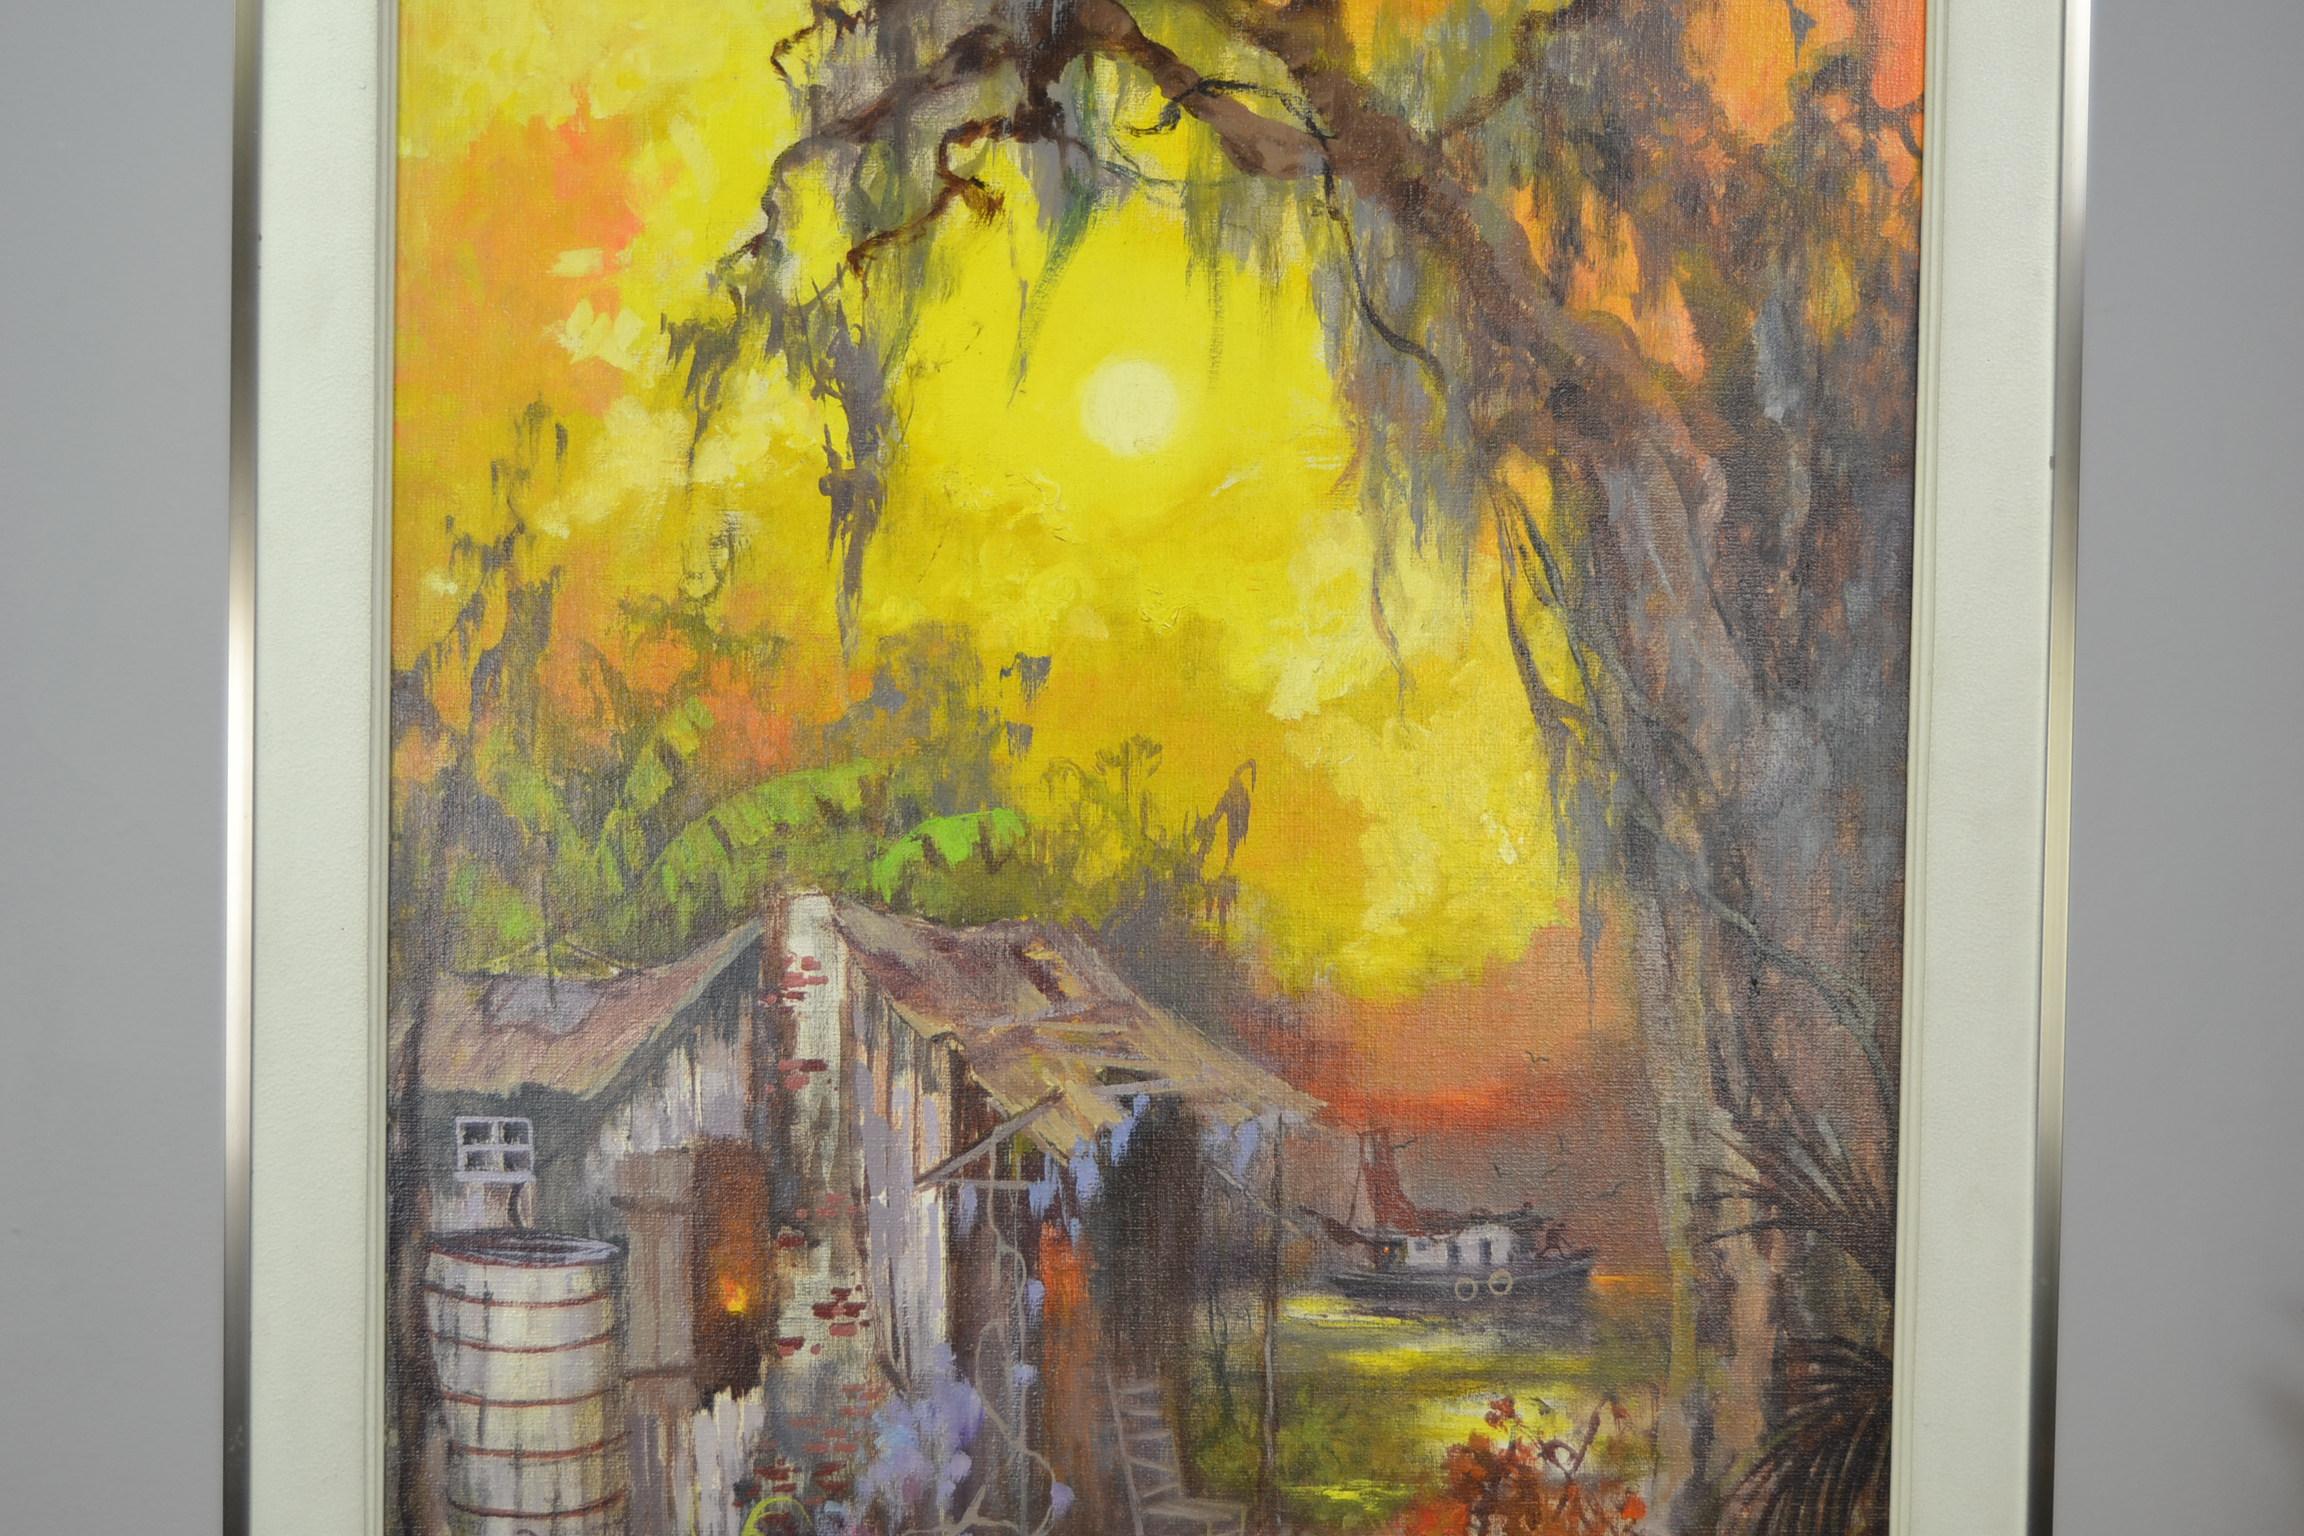 American Colette Pope Heldner, Signed Oil on Canvas Painting, Swamp Idyll